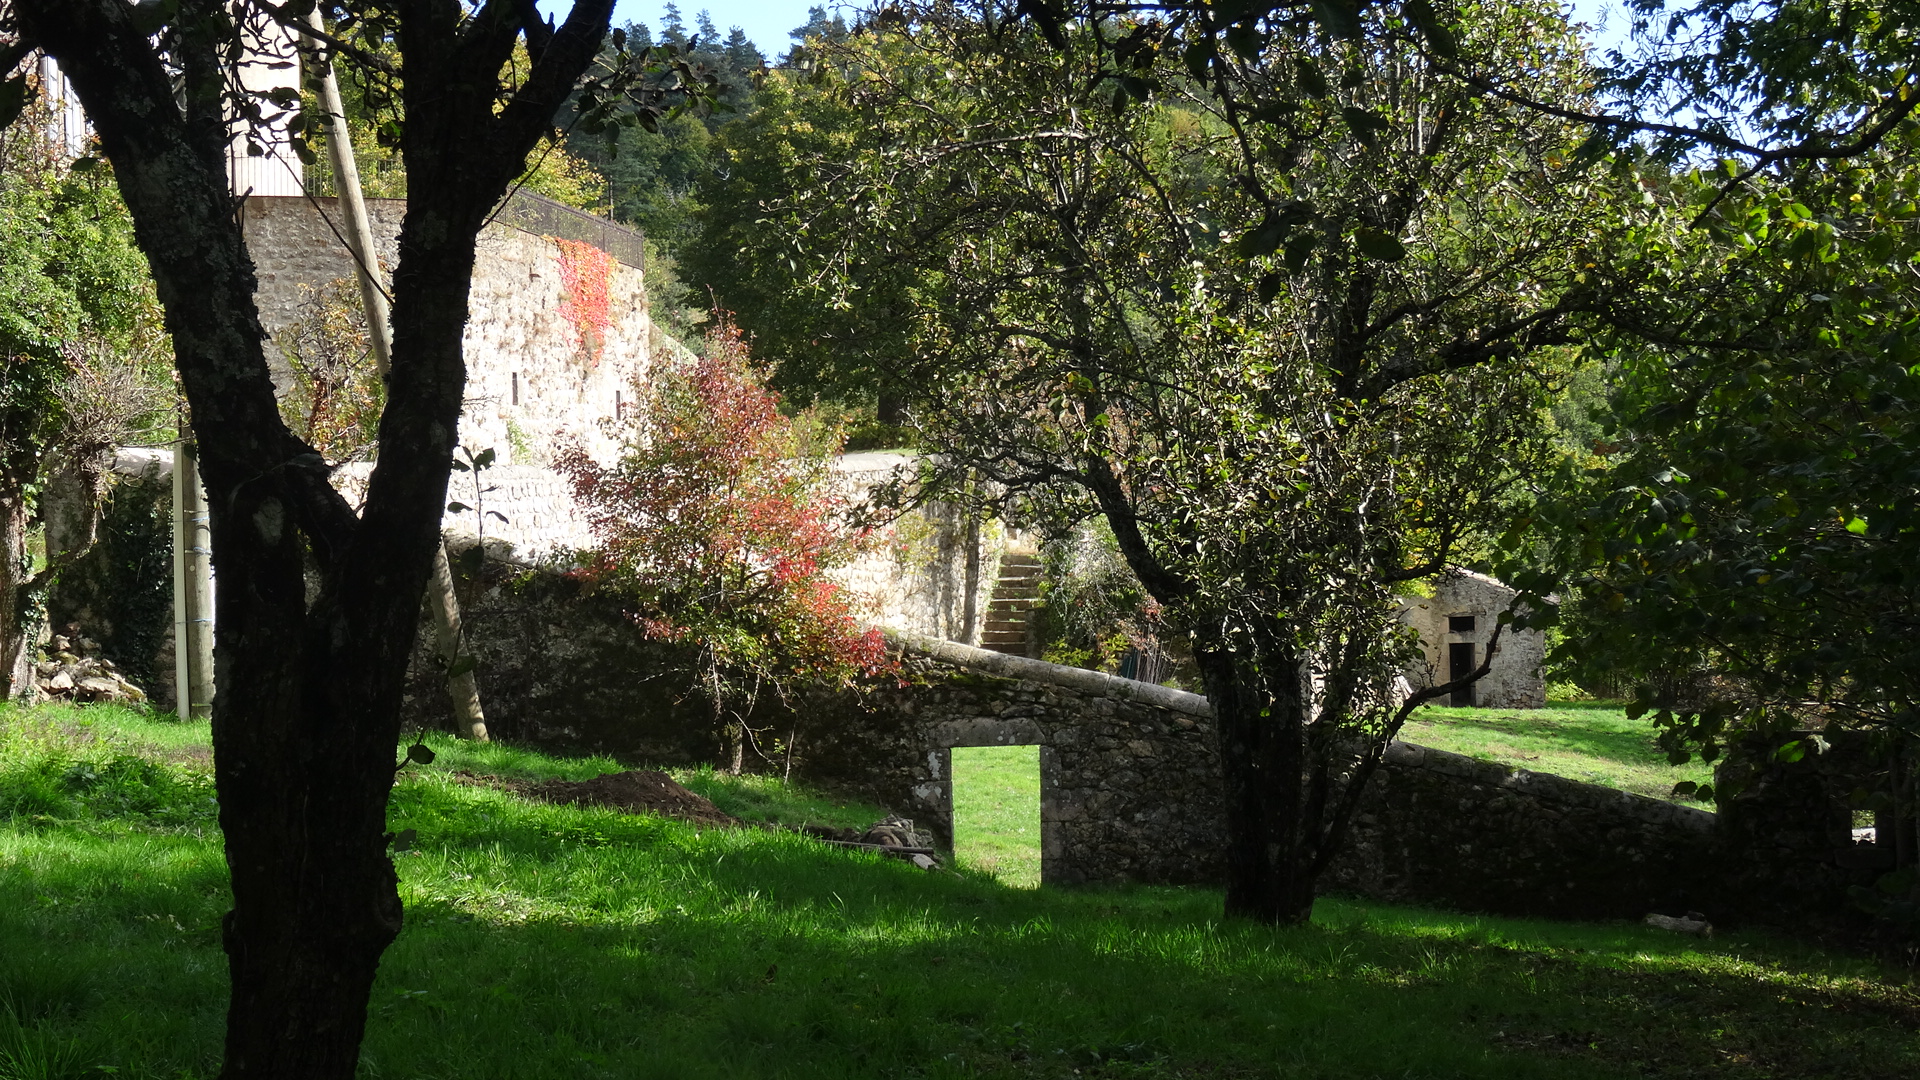 The garden is a green space surrounded by stone walls and trees